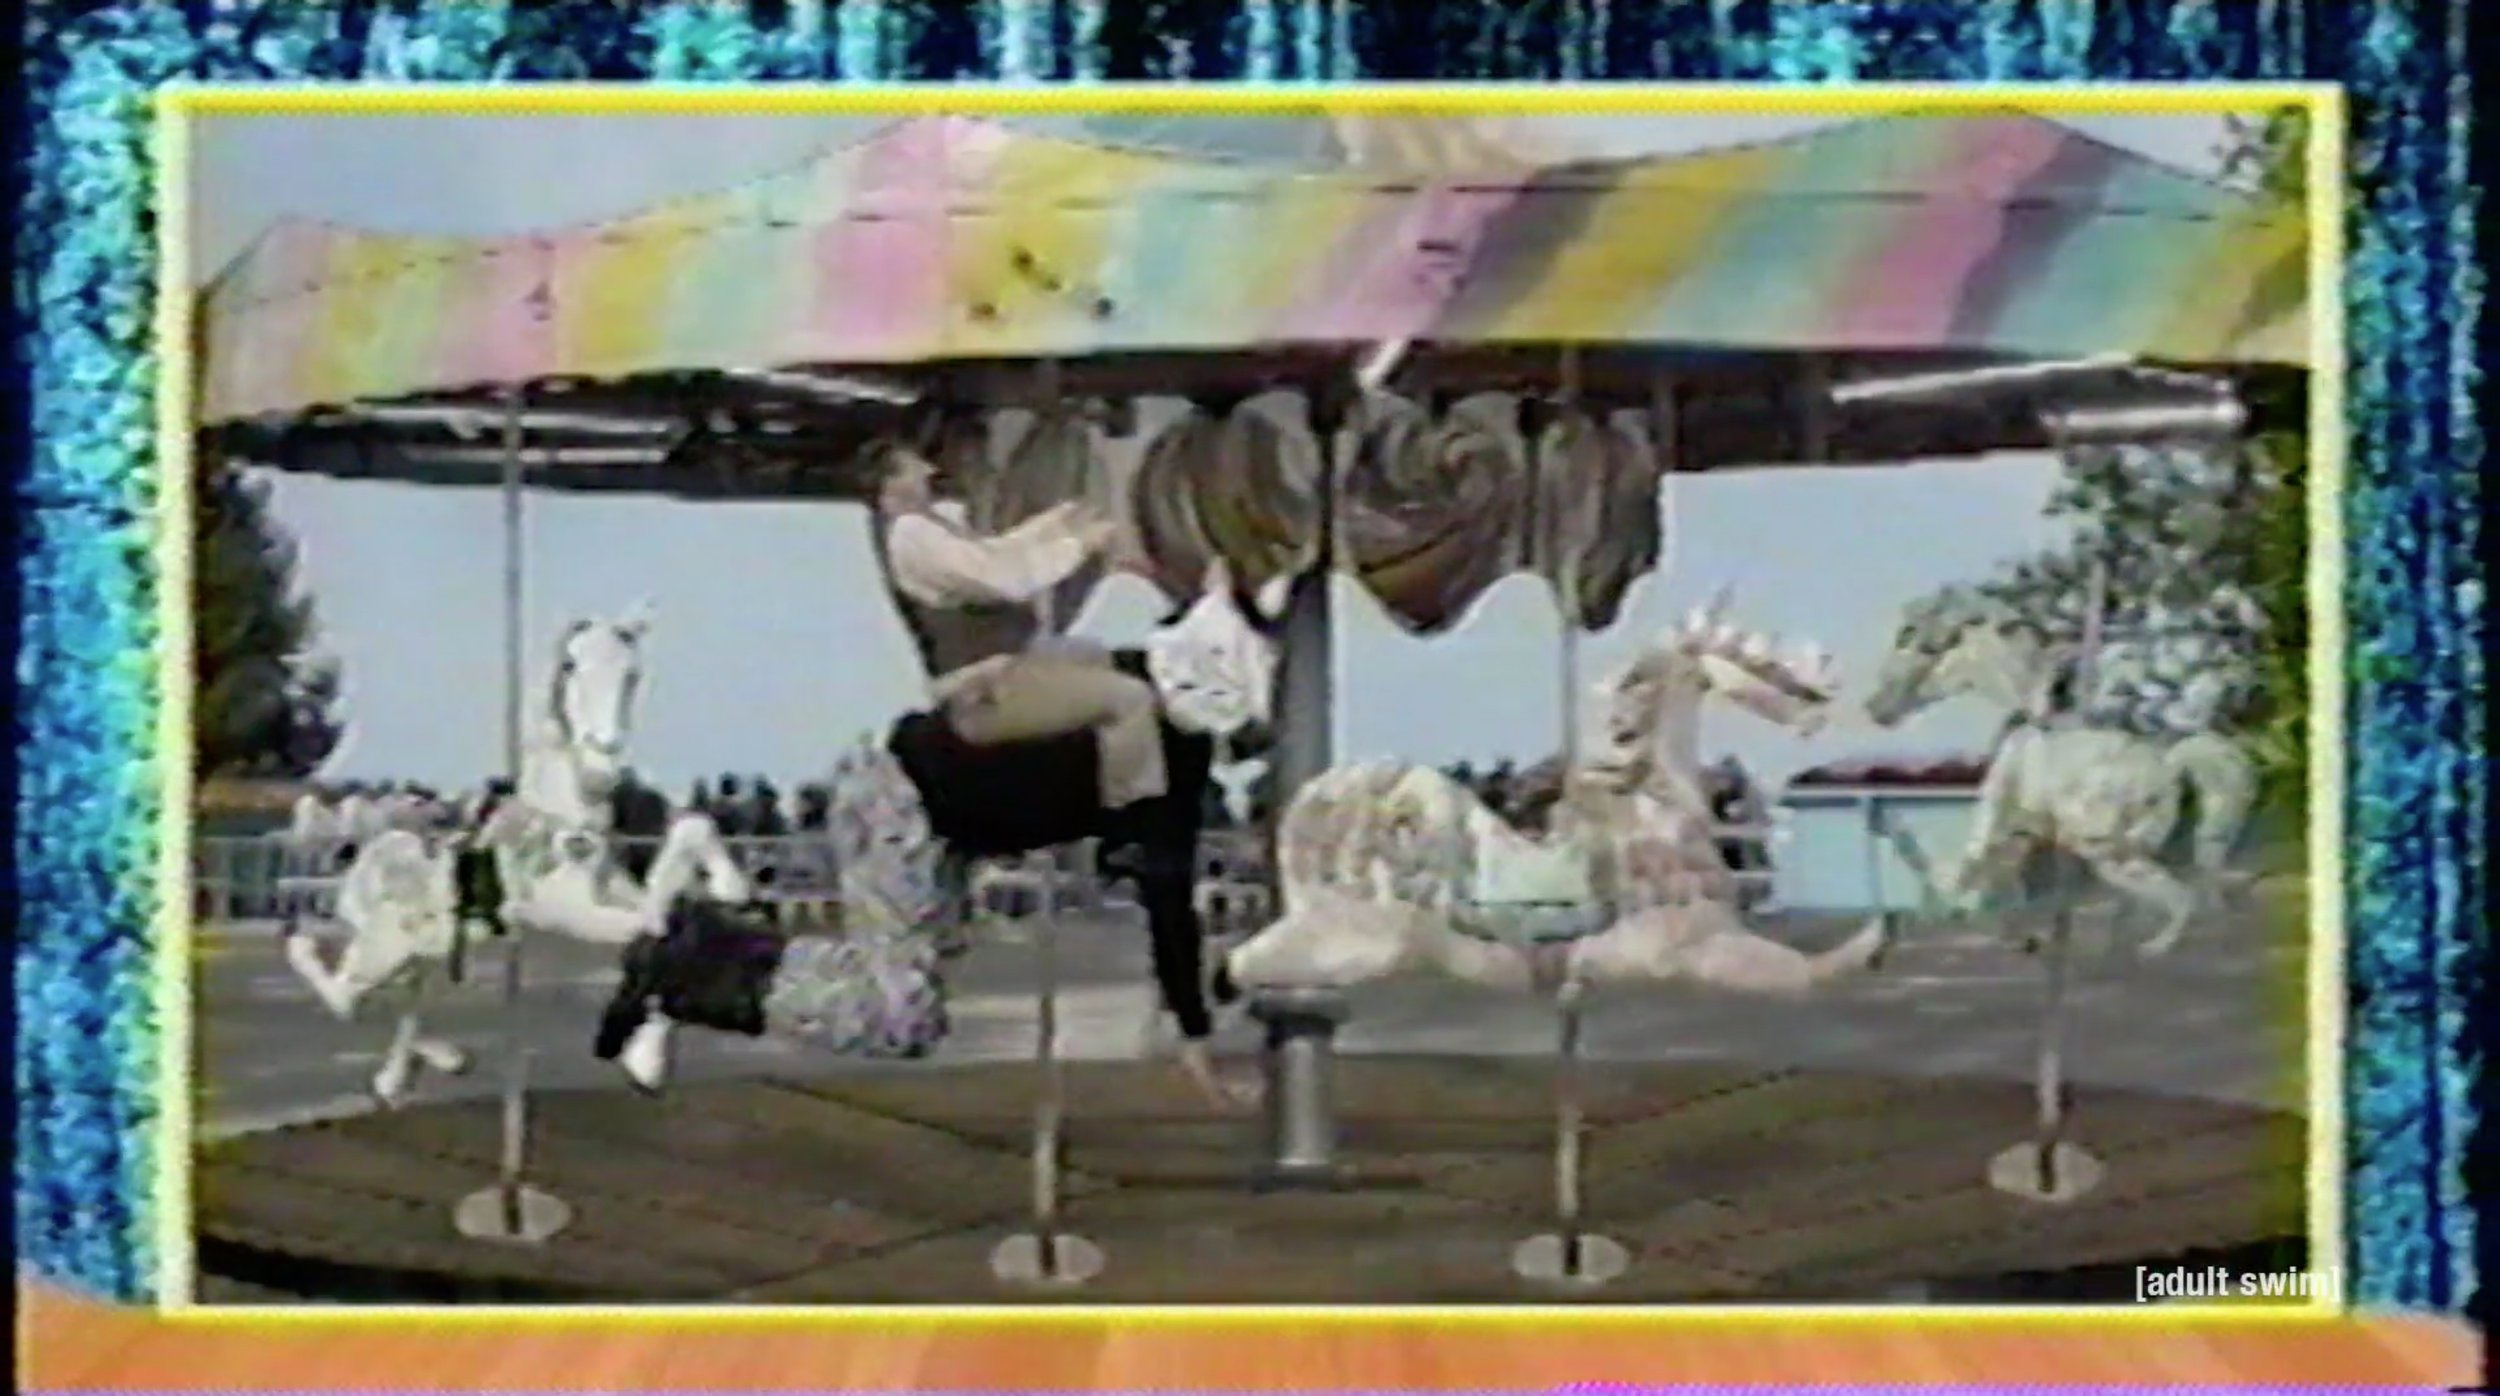 Pungo's Carnival Messed Up Merry-go-round Composite